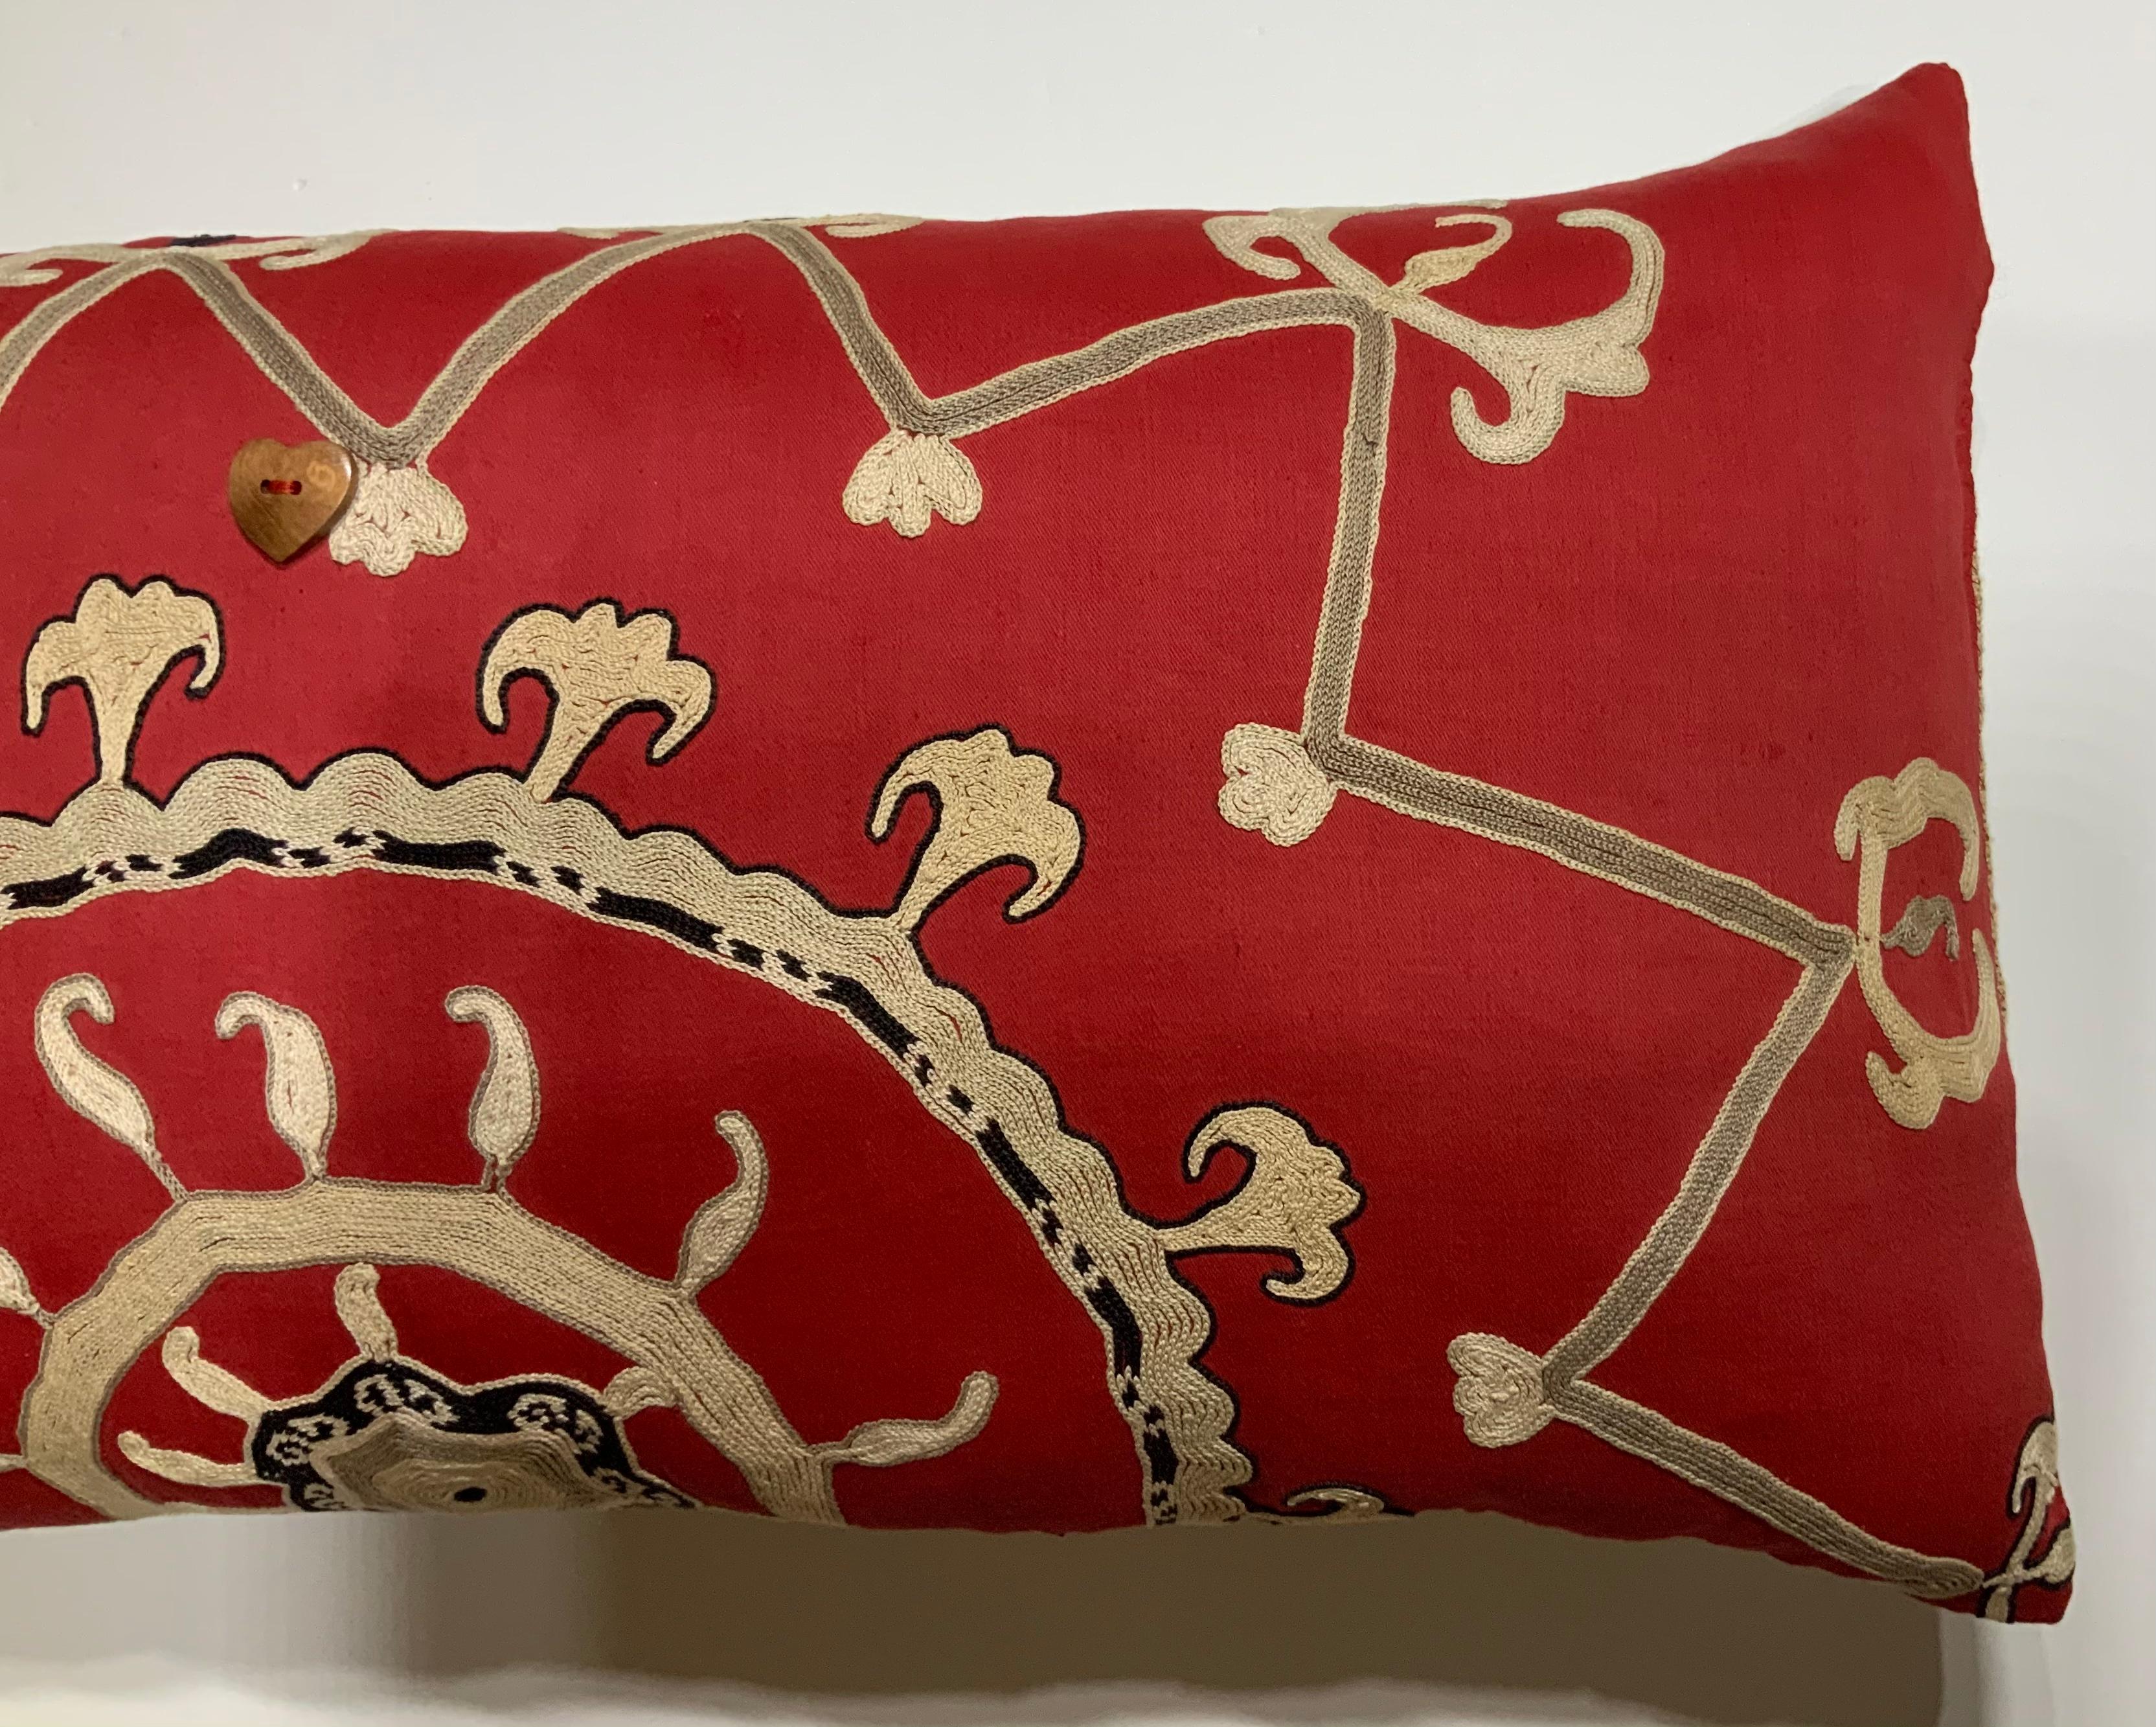 Beautiful pillow made of hand embroidery Suzani textile, with sun and vines embroidery motif on a red cotton background. Great decorative vibrant pillow for any room. Fresh insert, cotton backing.
  